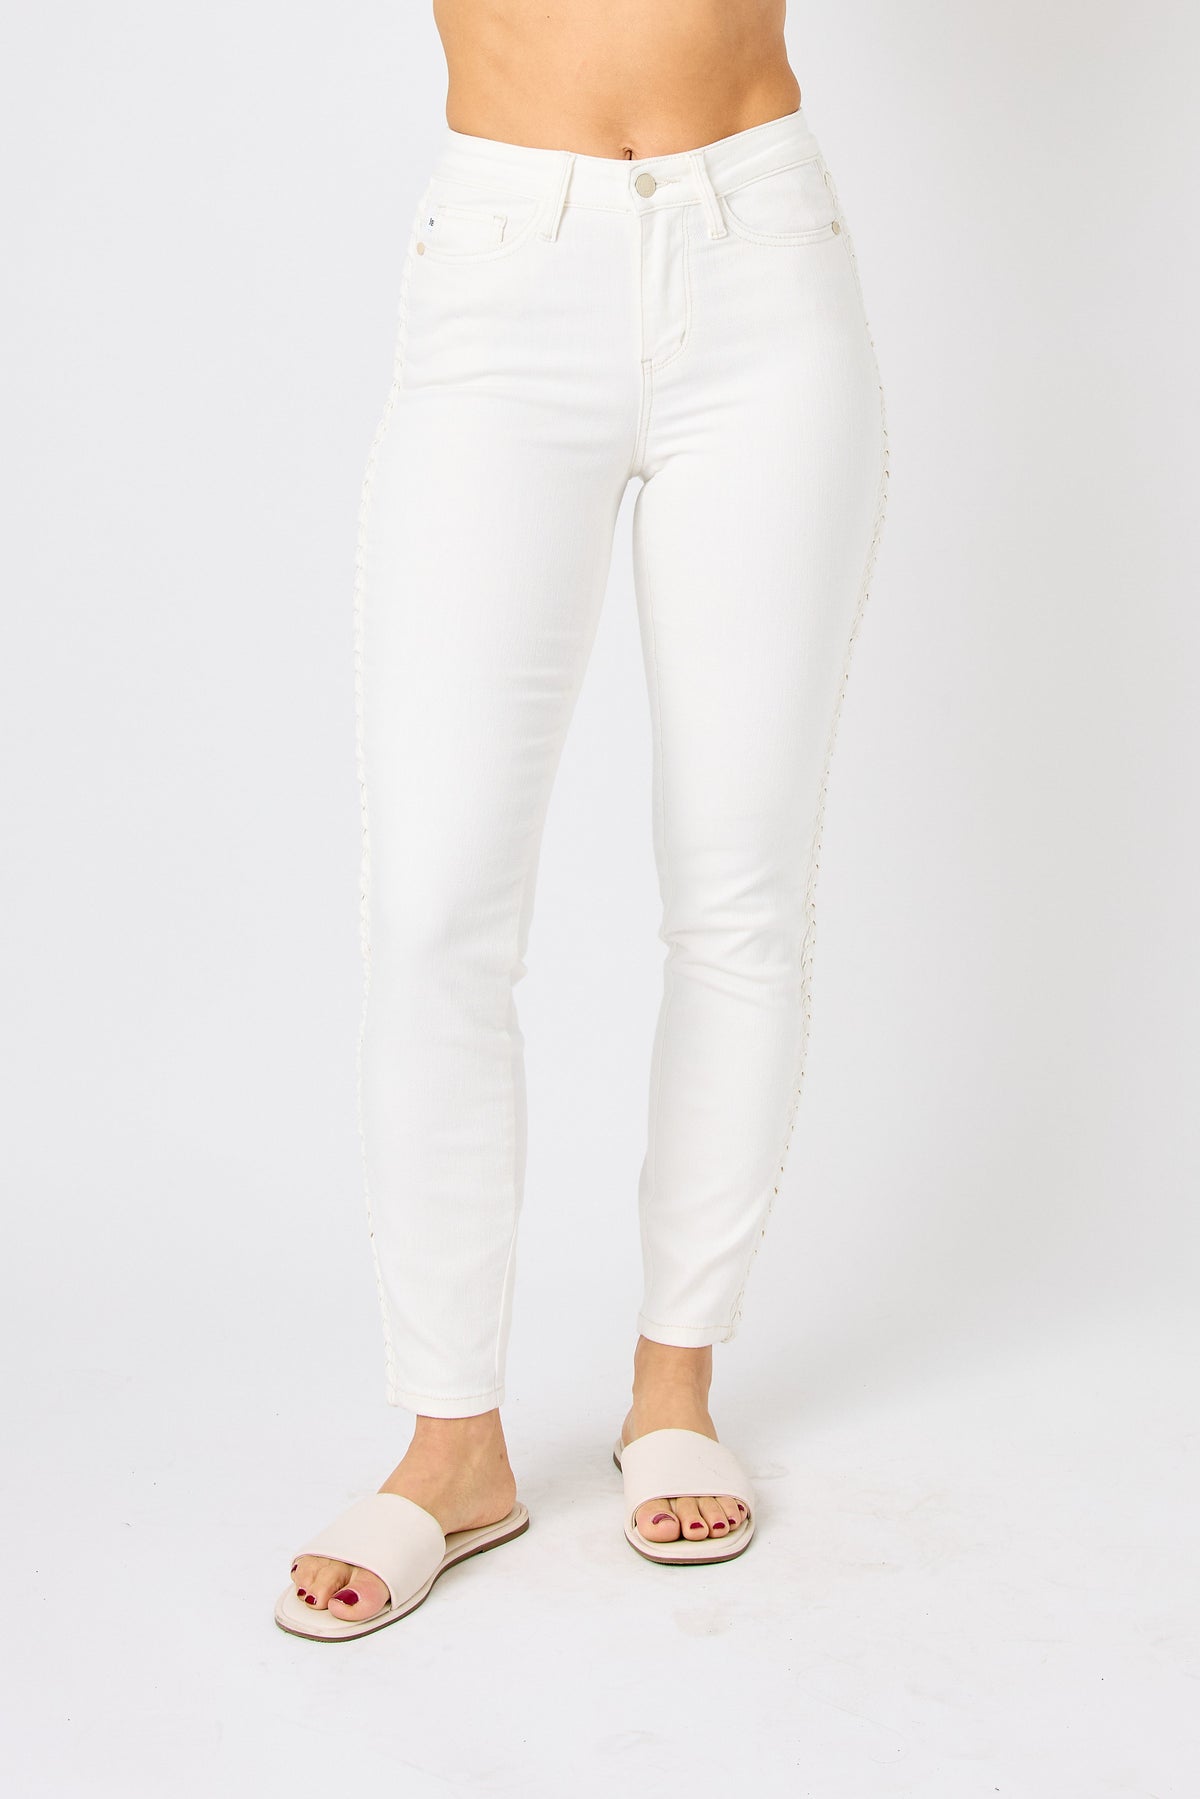 judy blue mid rise braided detail relaxed jeans in white-front view